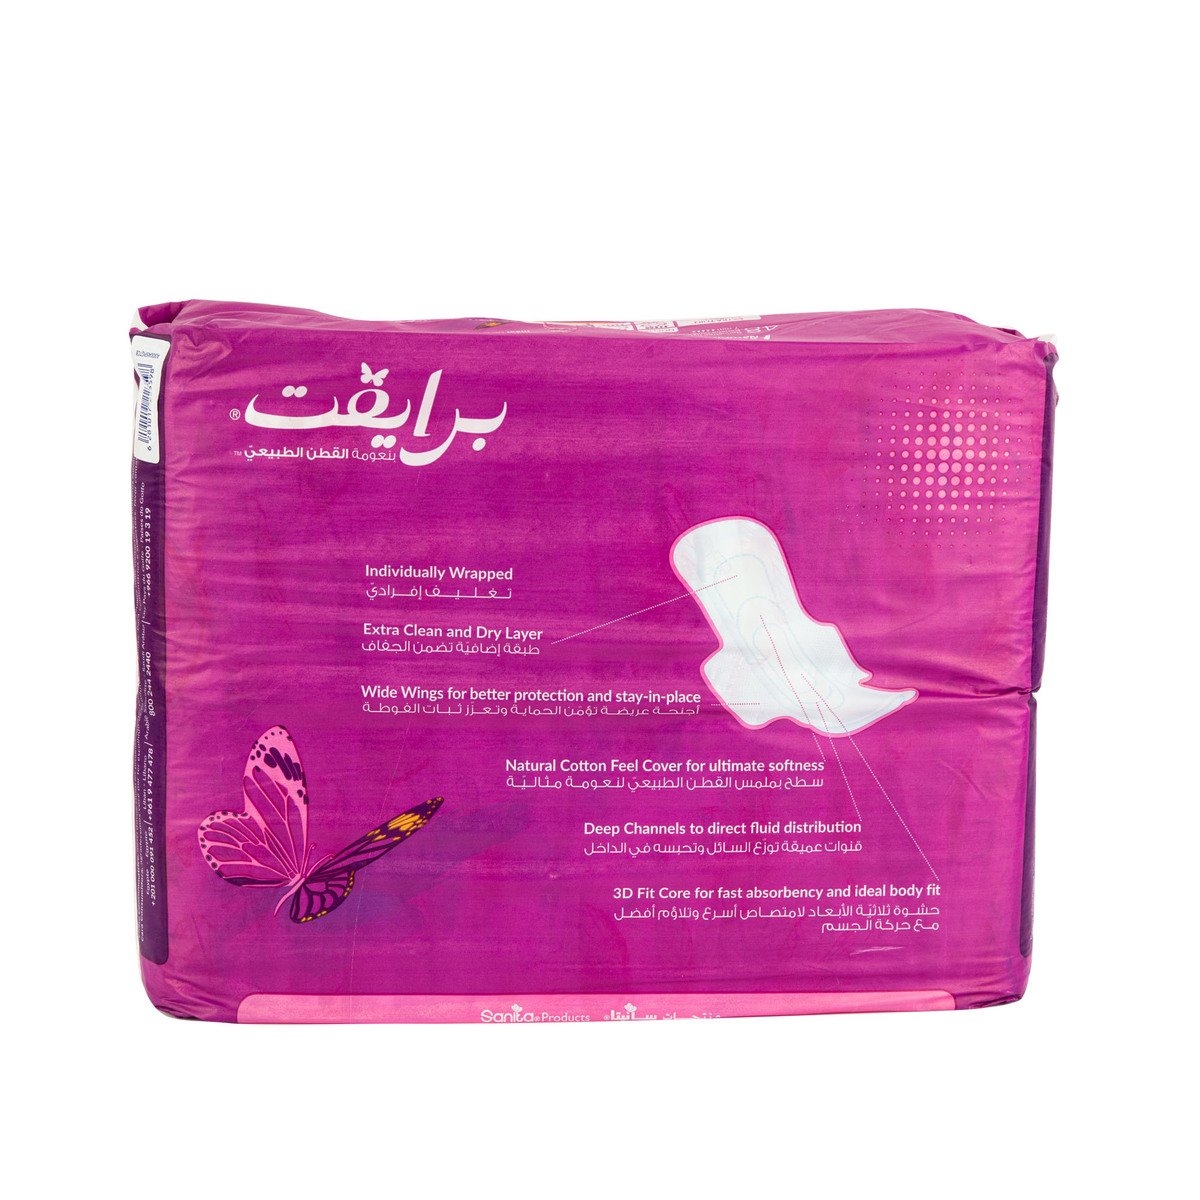 Sanita Private Cotton Night Feminine Pads With Wings Value Pack 48pcs